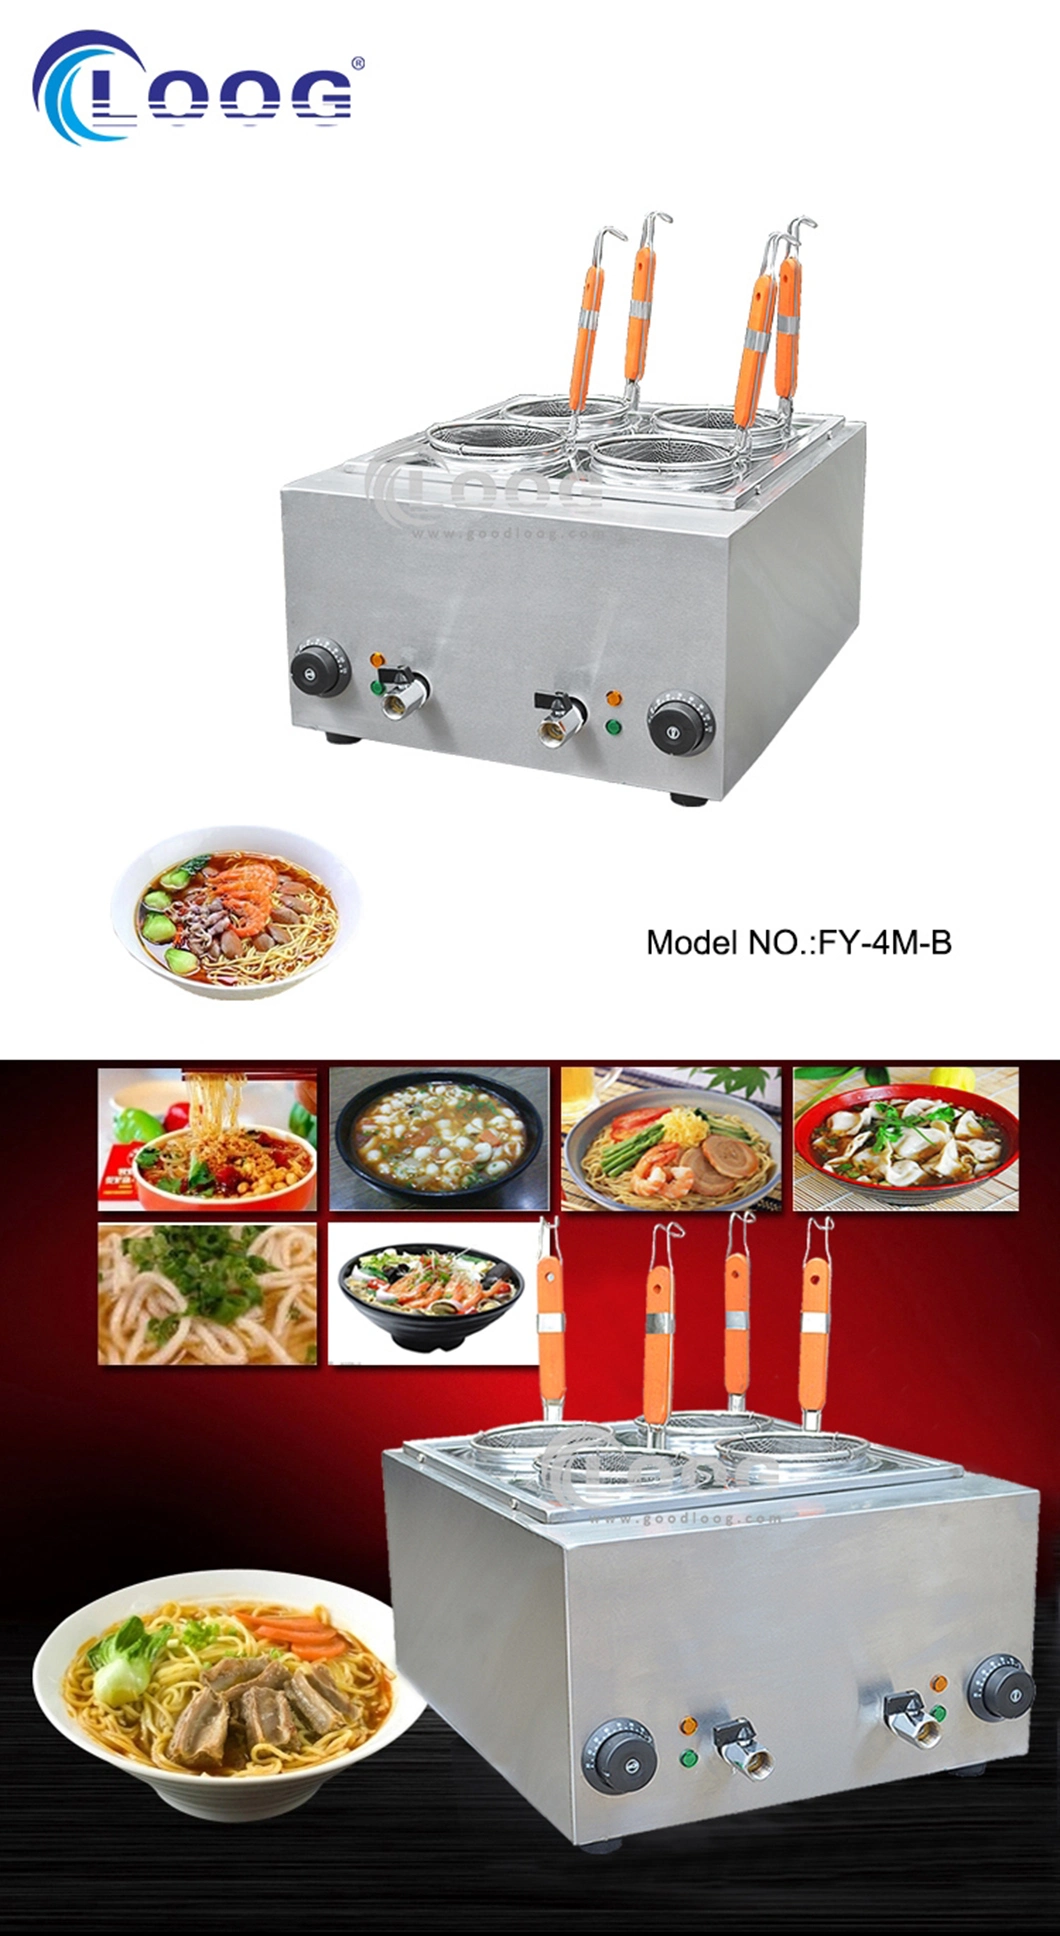 Best Professional Stainless Steel Pasta Boiler Commercial Restaurant Kitchen Pasta Cooker Pot with Bain Marie